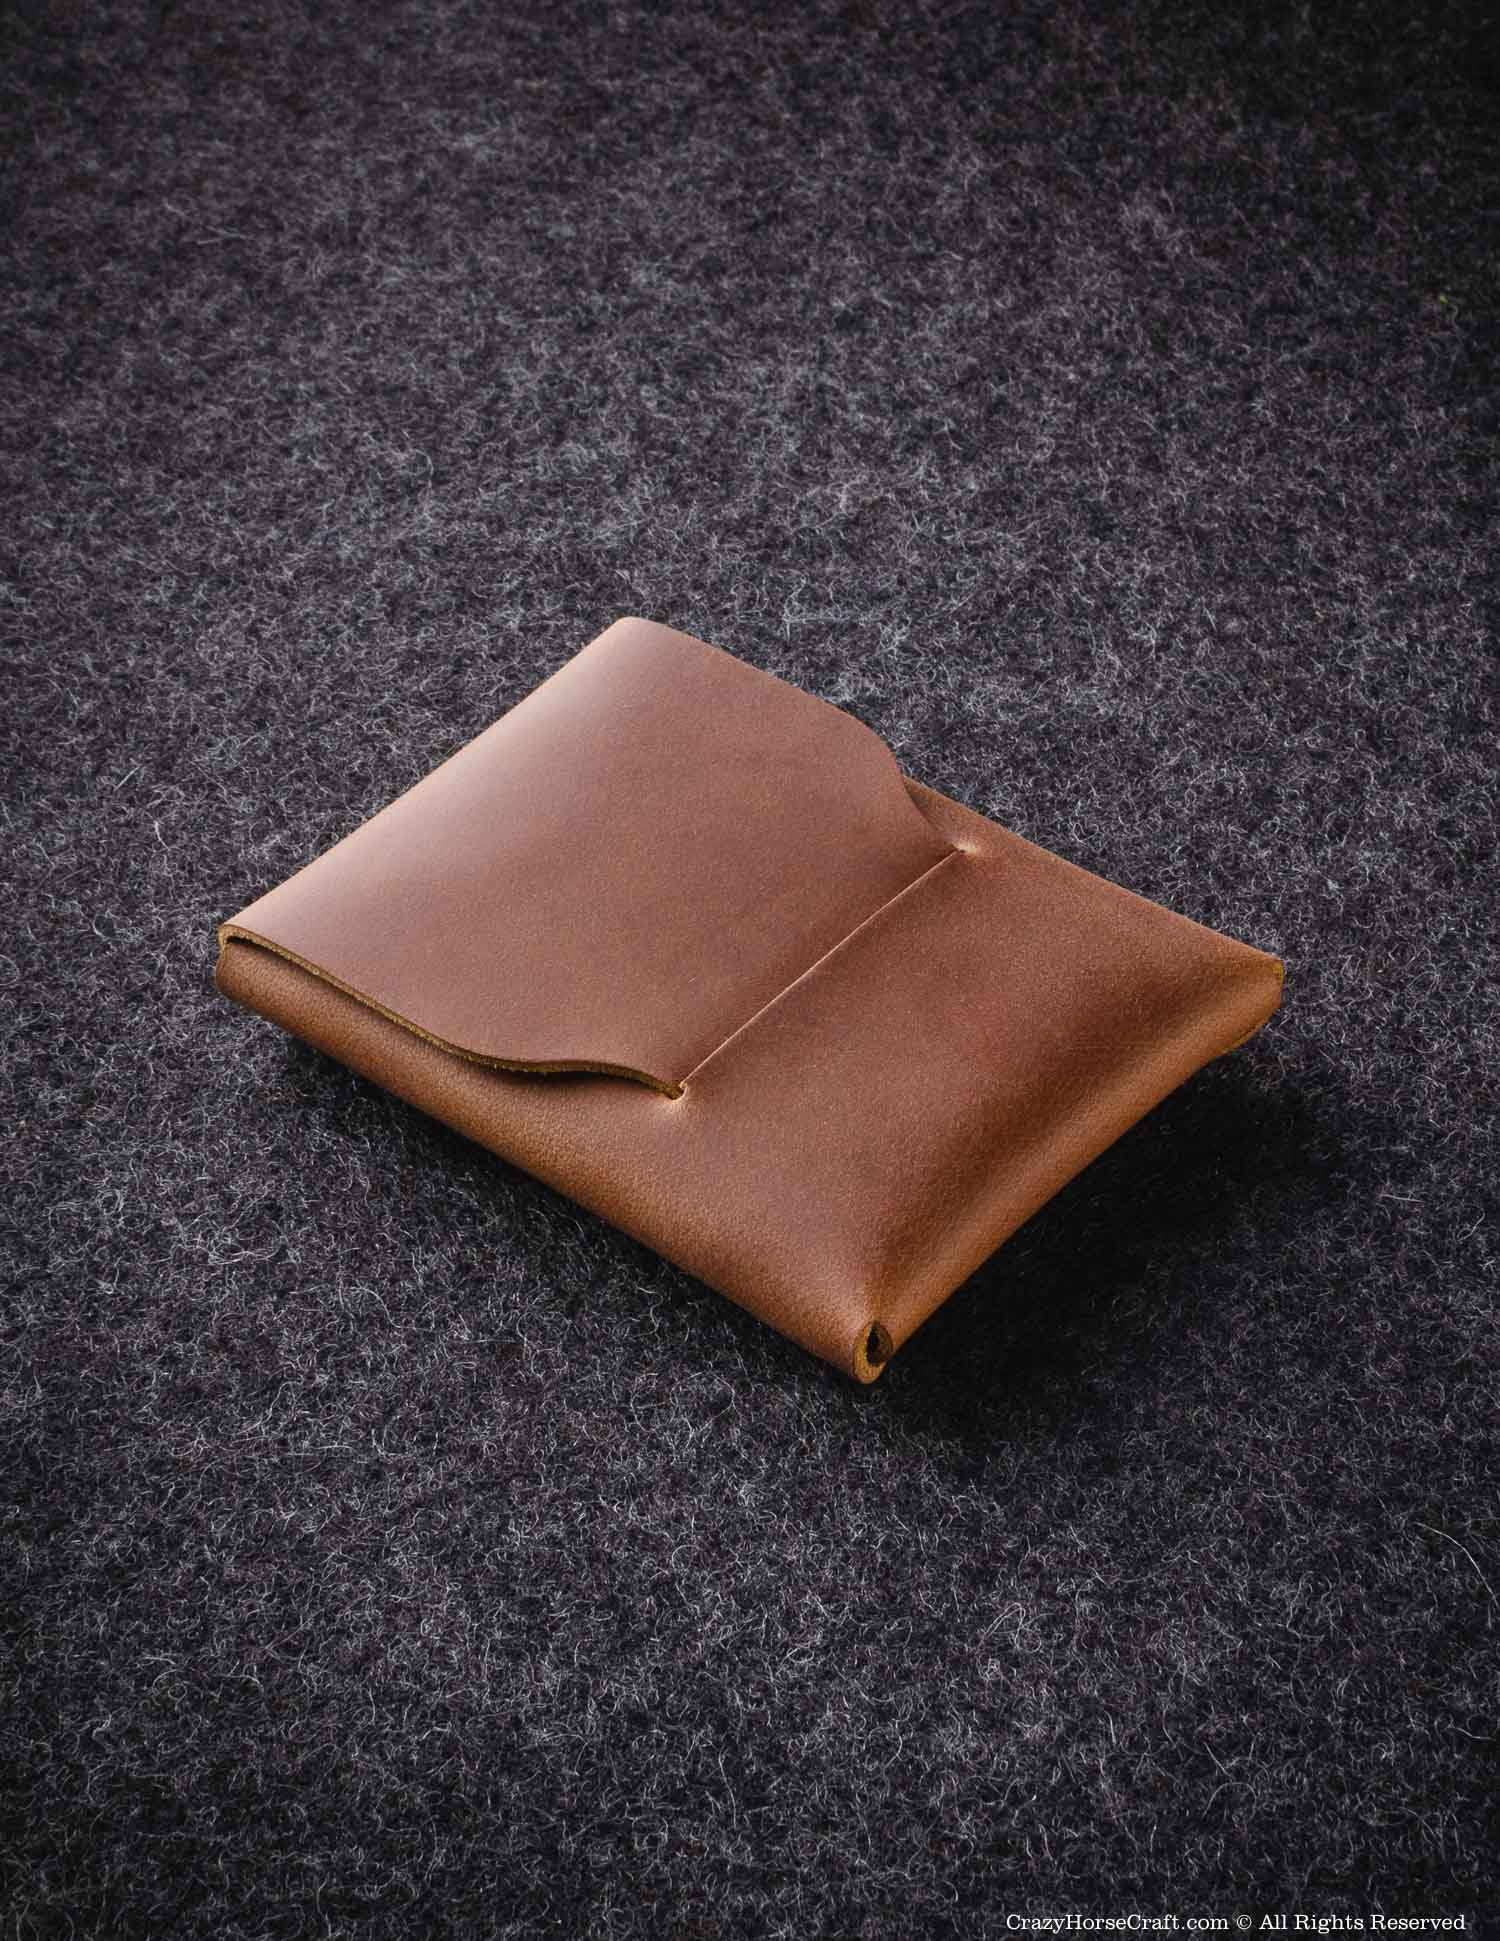 #color of the leather_classic brown